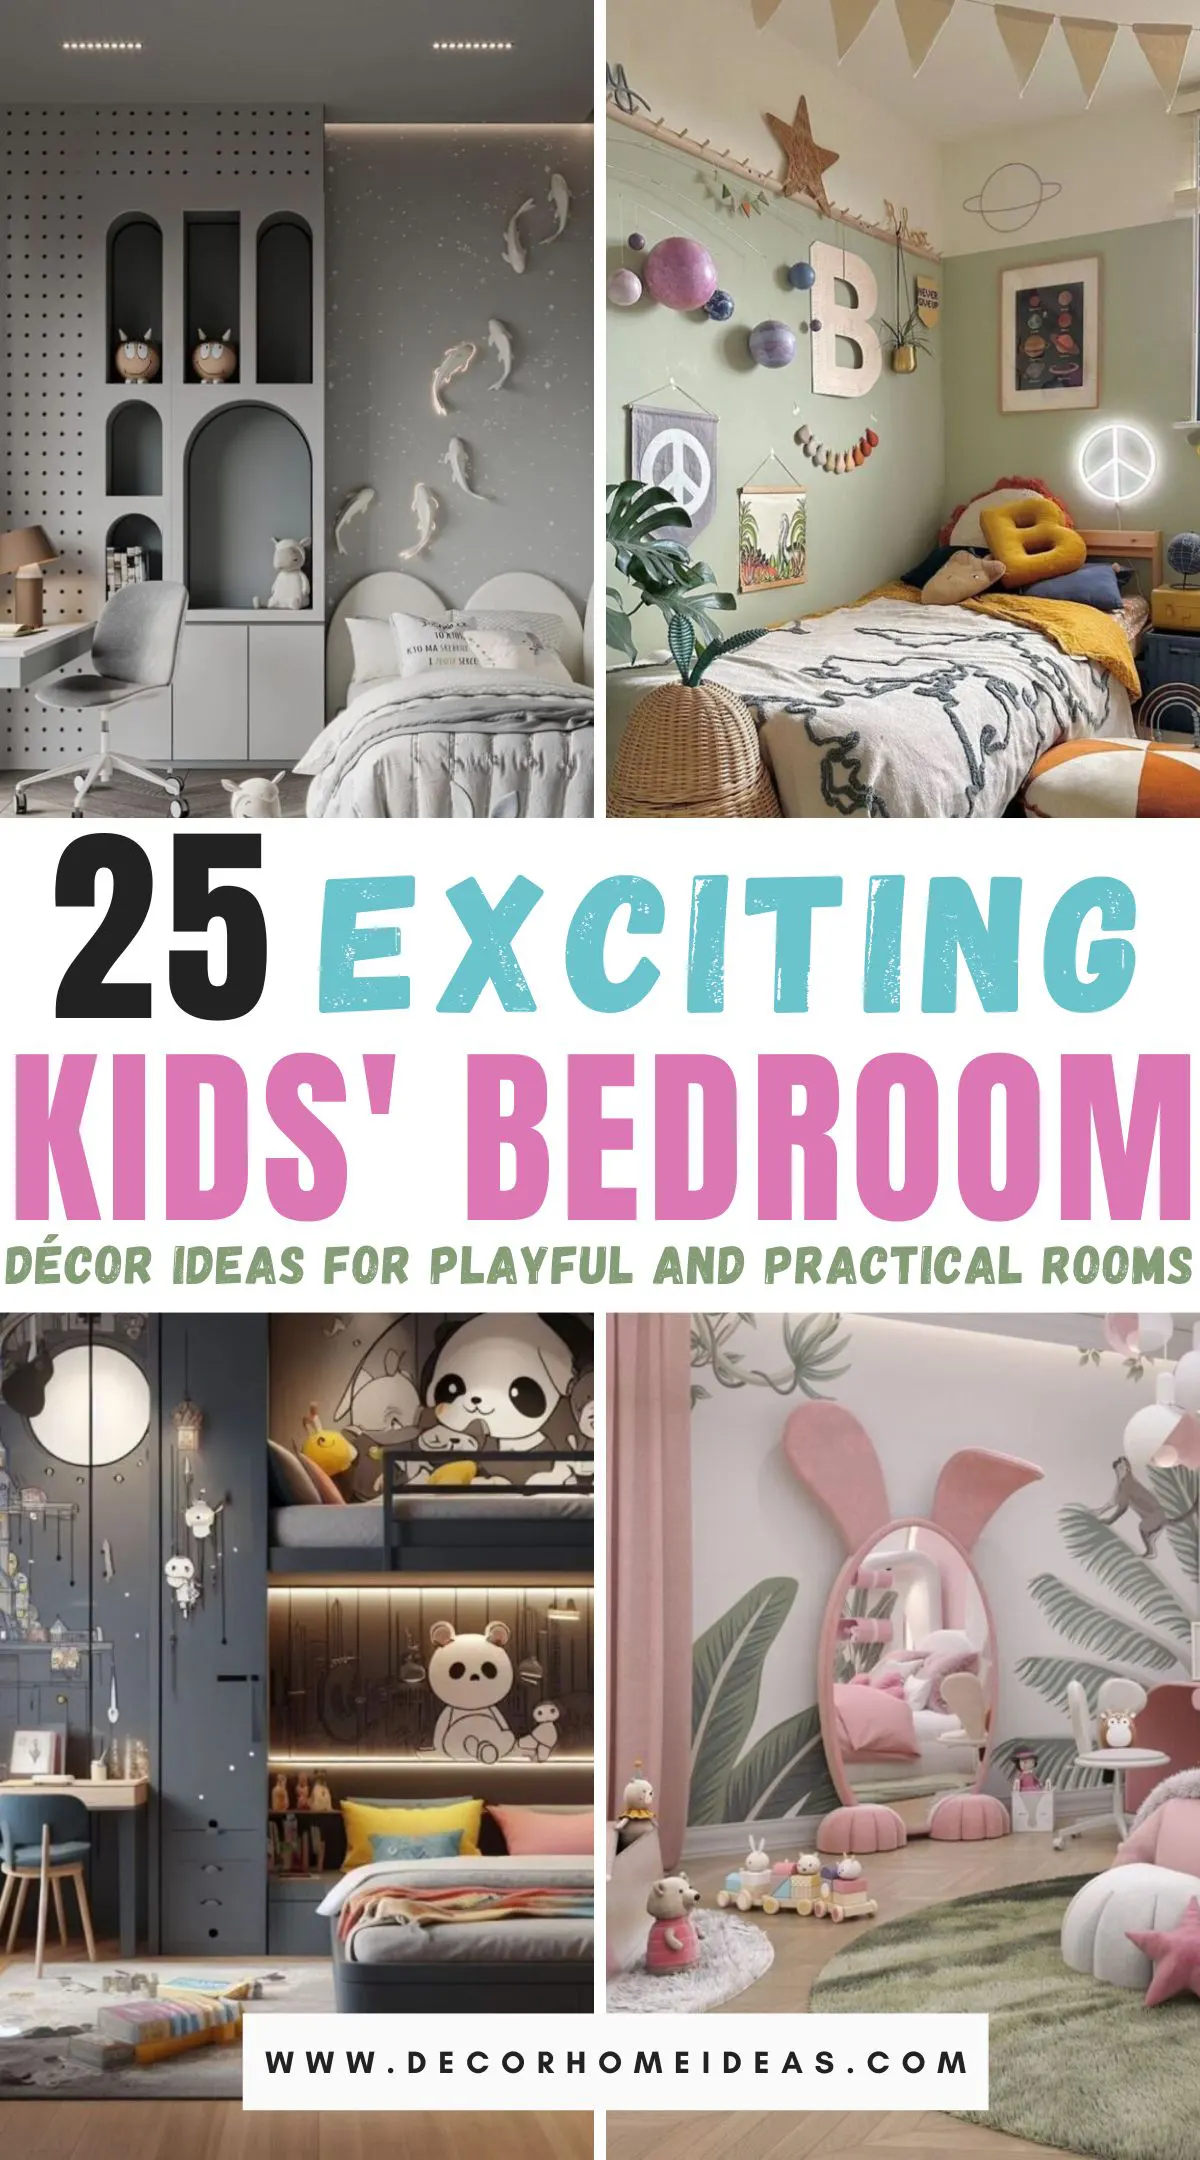 Explore 25 kids’ bedroom ideas featuring fun themes and functional décor. From whimsical fairy tales to adventurous space explorations, discover creative ways to design a space that sparks imagination and provides practical solutions for storage and play. Transform your child's room into a magical and organized haven they'll love.